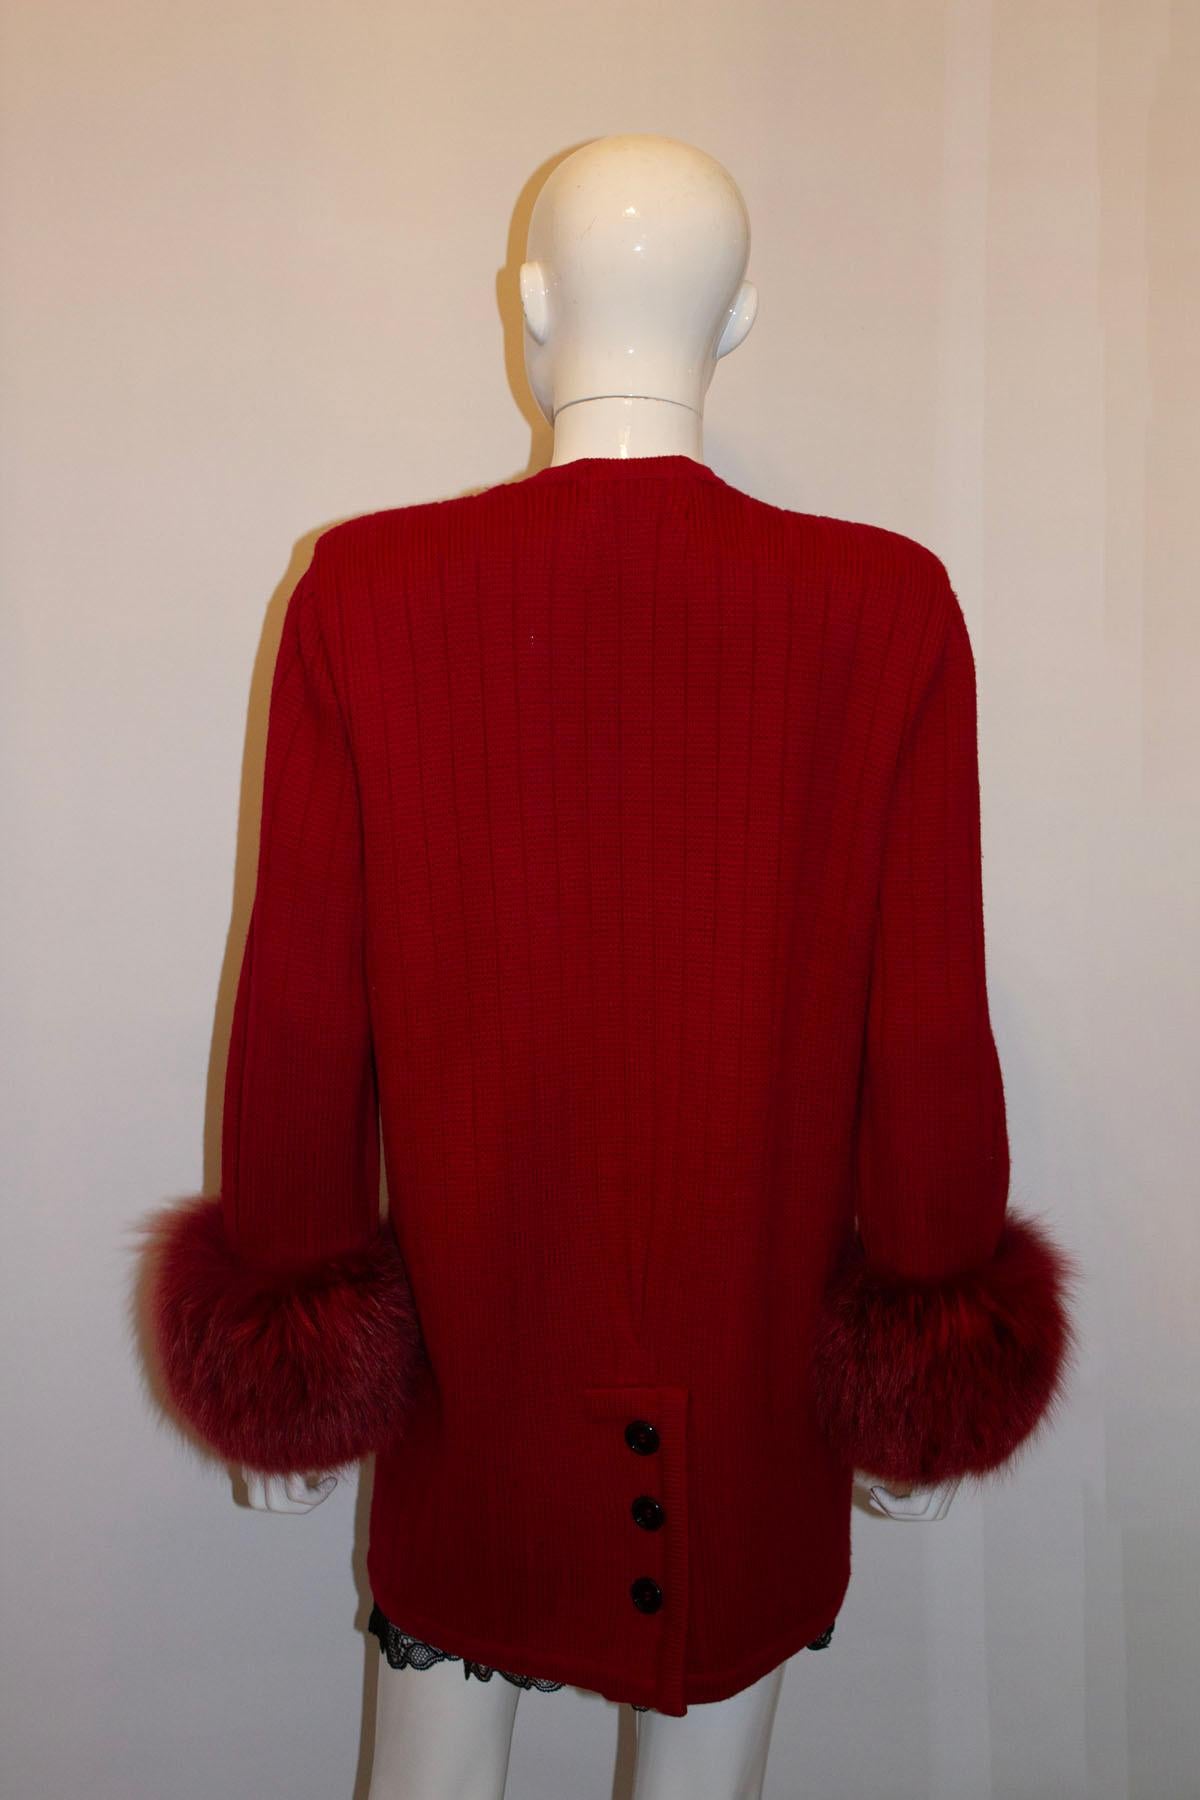 Vintage Harrods Red Wool Knit Jacket with Fox Cuffs For Sale 2